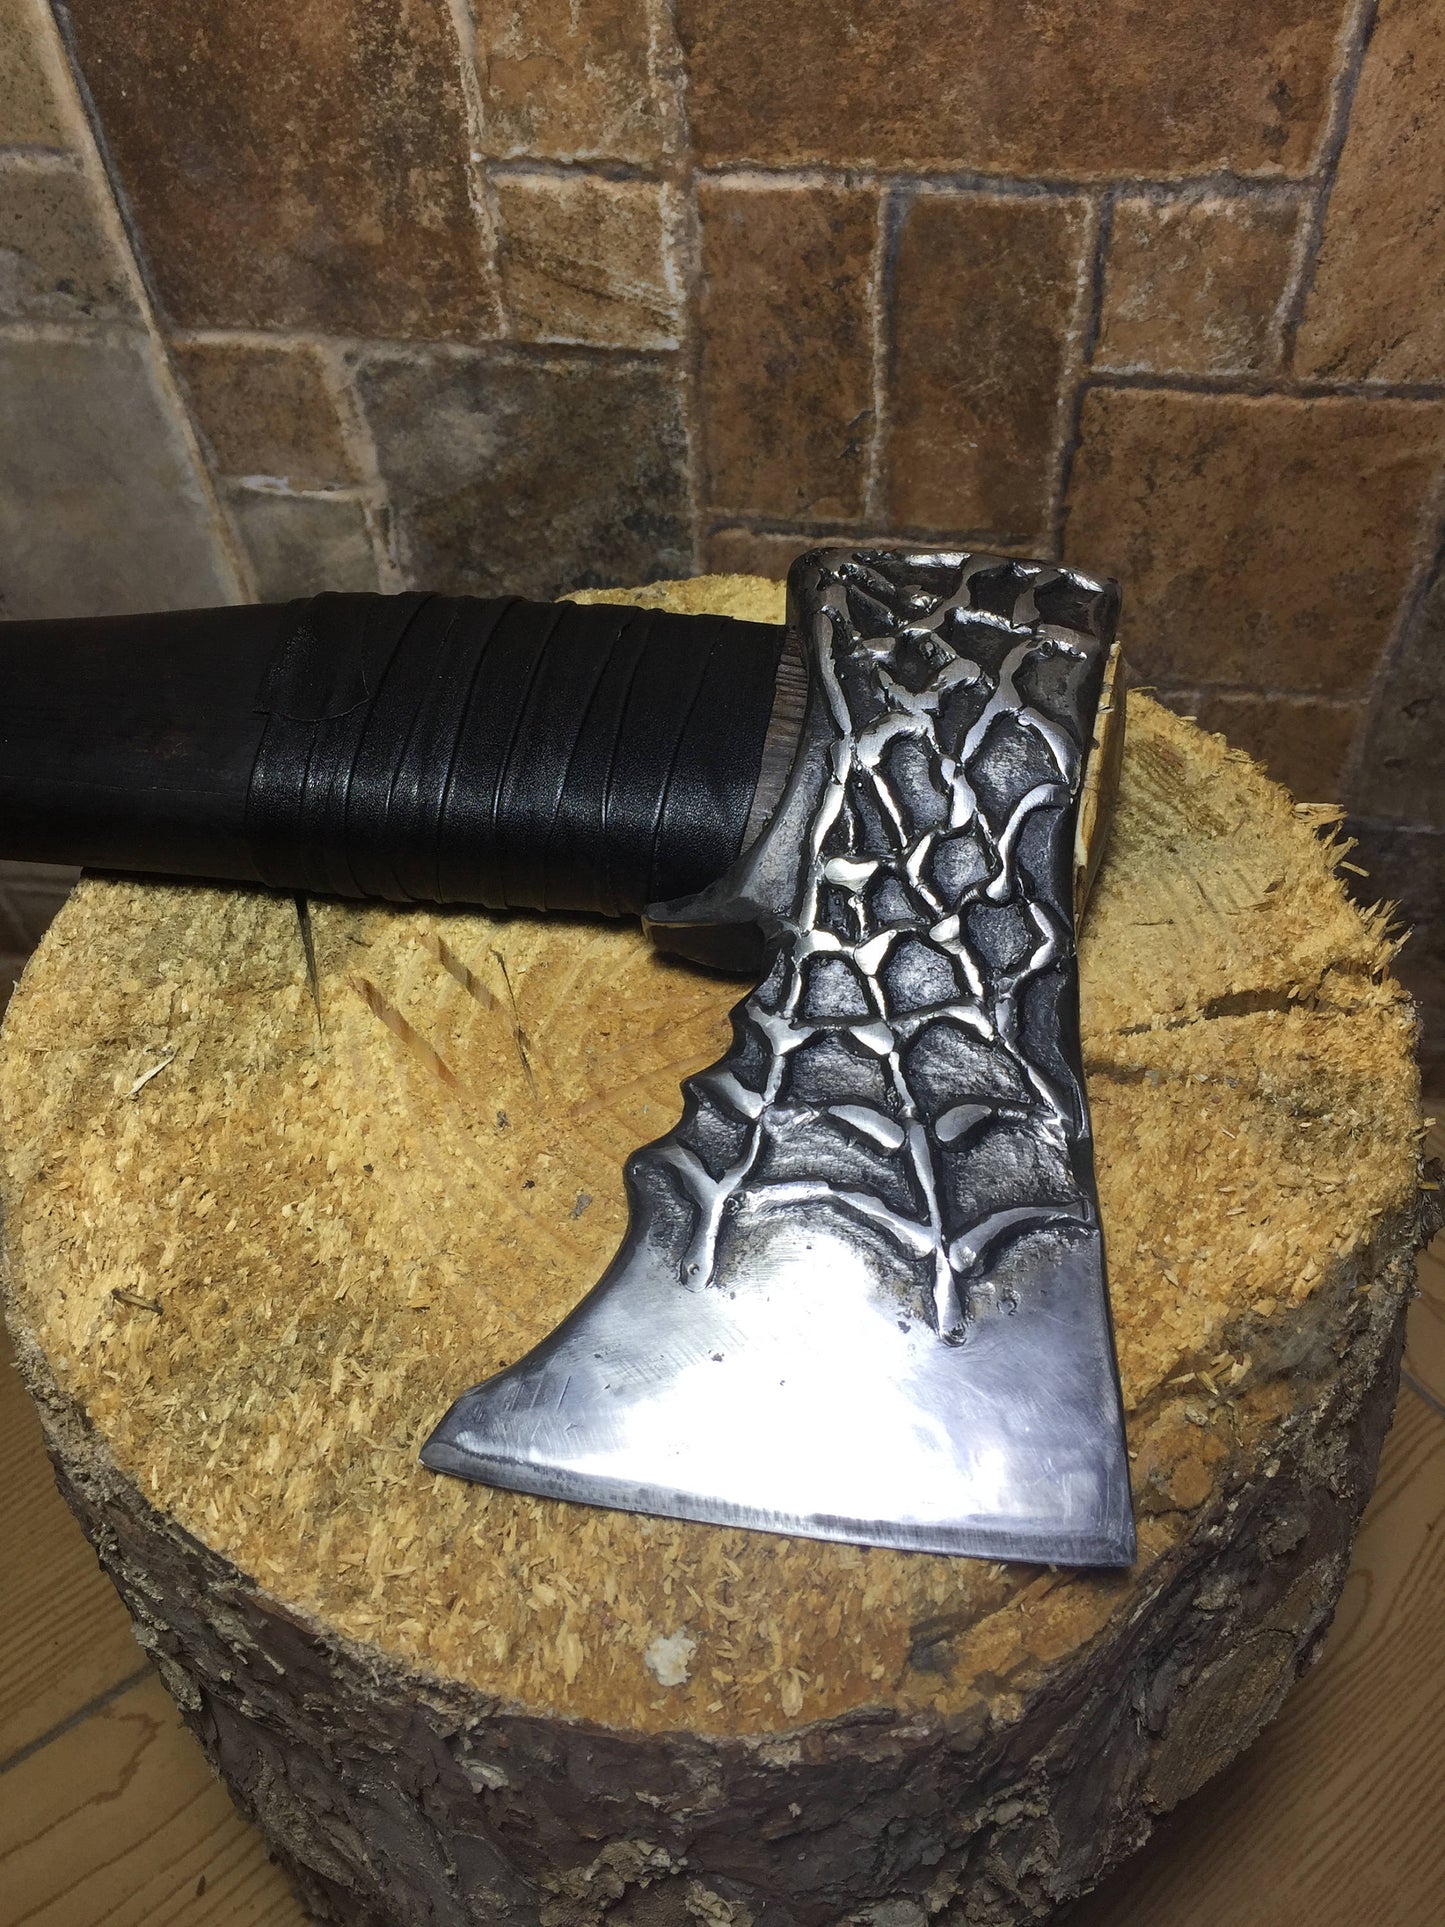 Viking axe, medieval axe, iron gift for him, tomahawk, hatchet, hiking, hunting, mens gifts, chopping axe, gifts for men, manly iron gifts